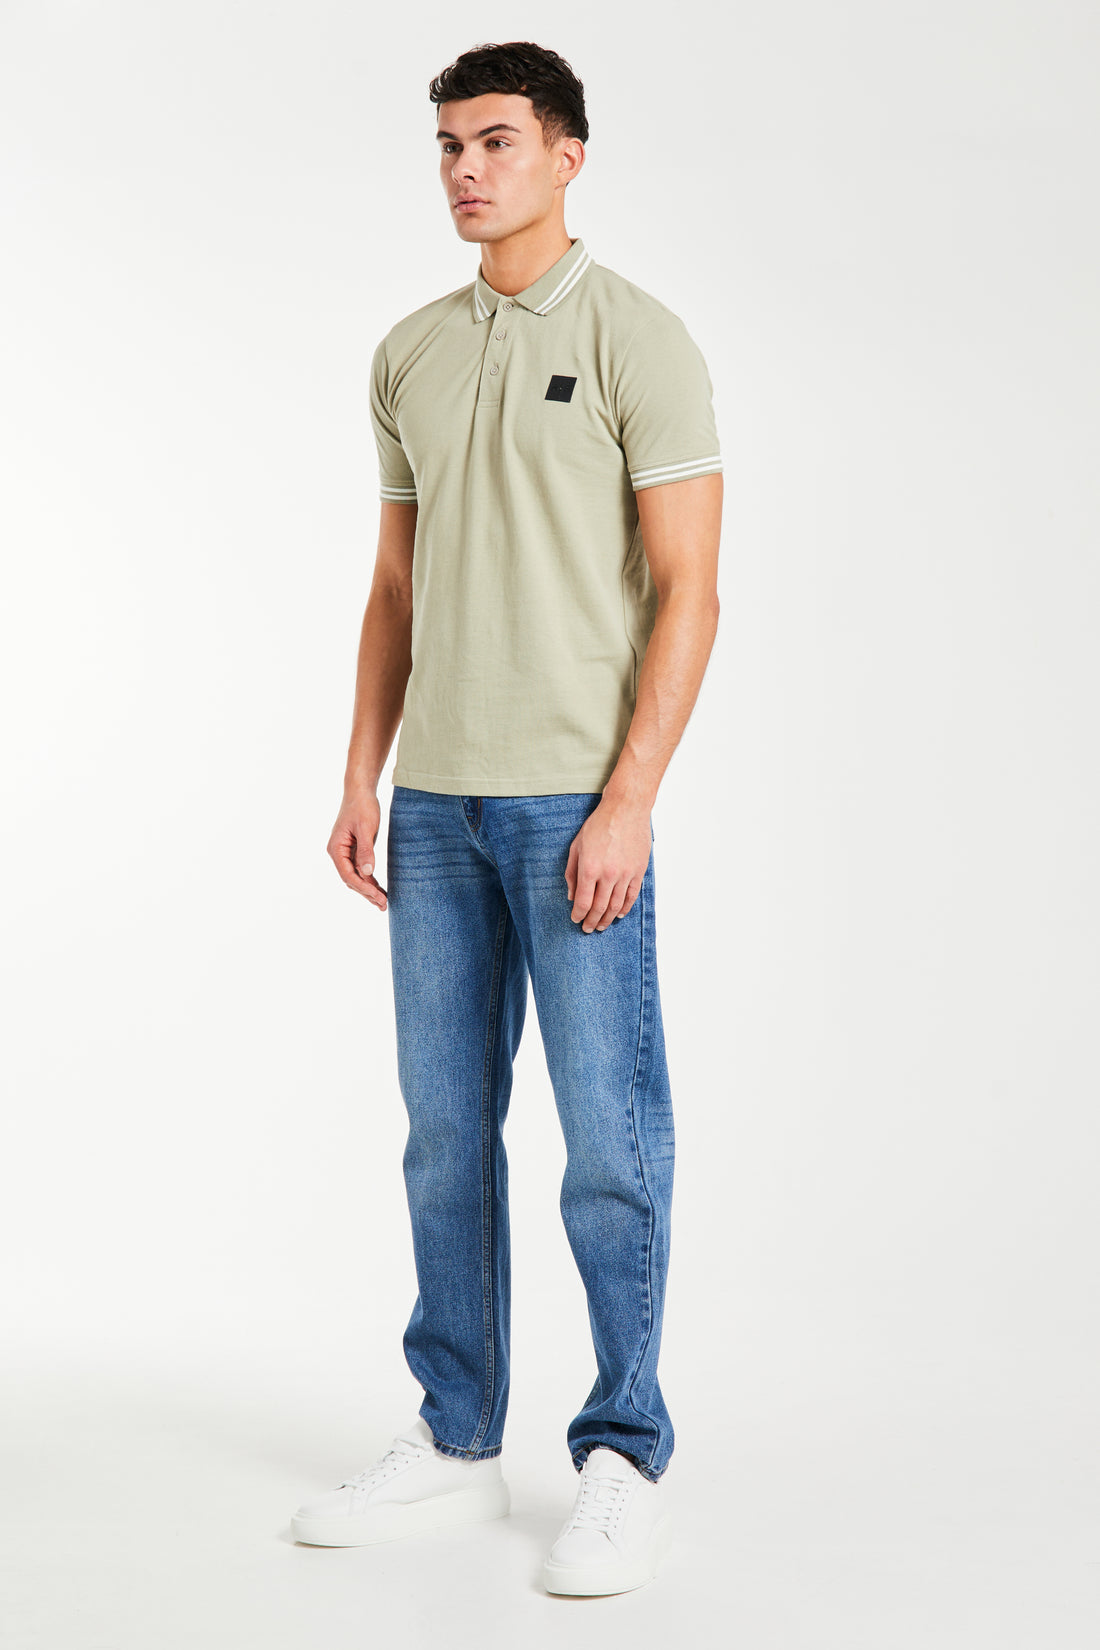 men's cheap polo shirts in green styled with jeans